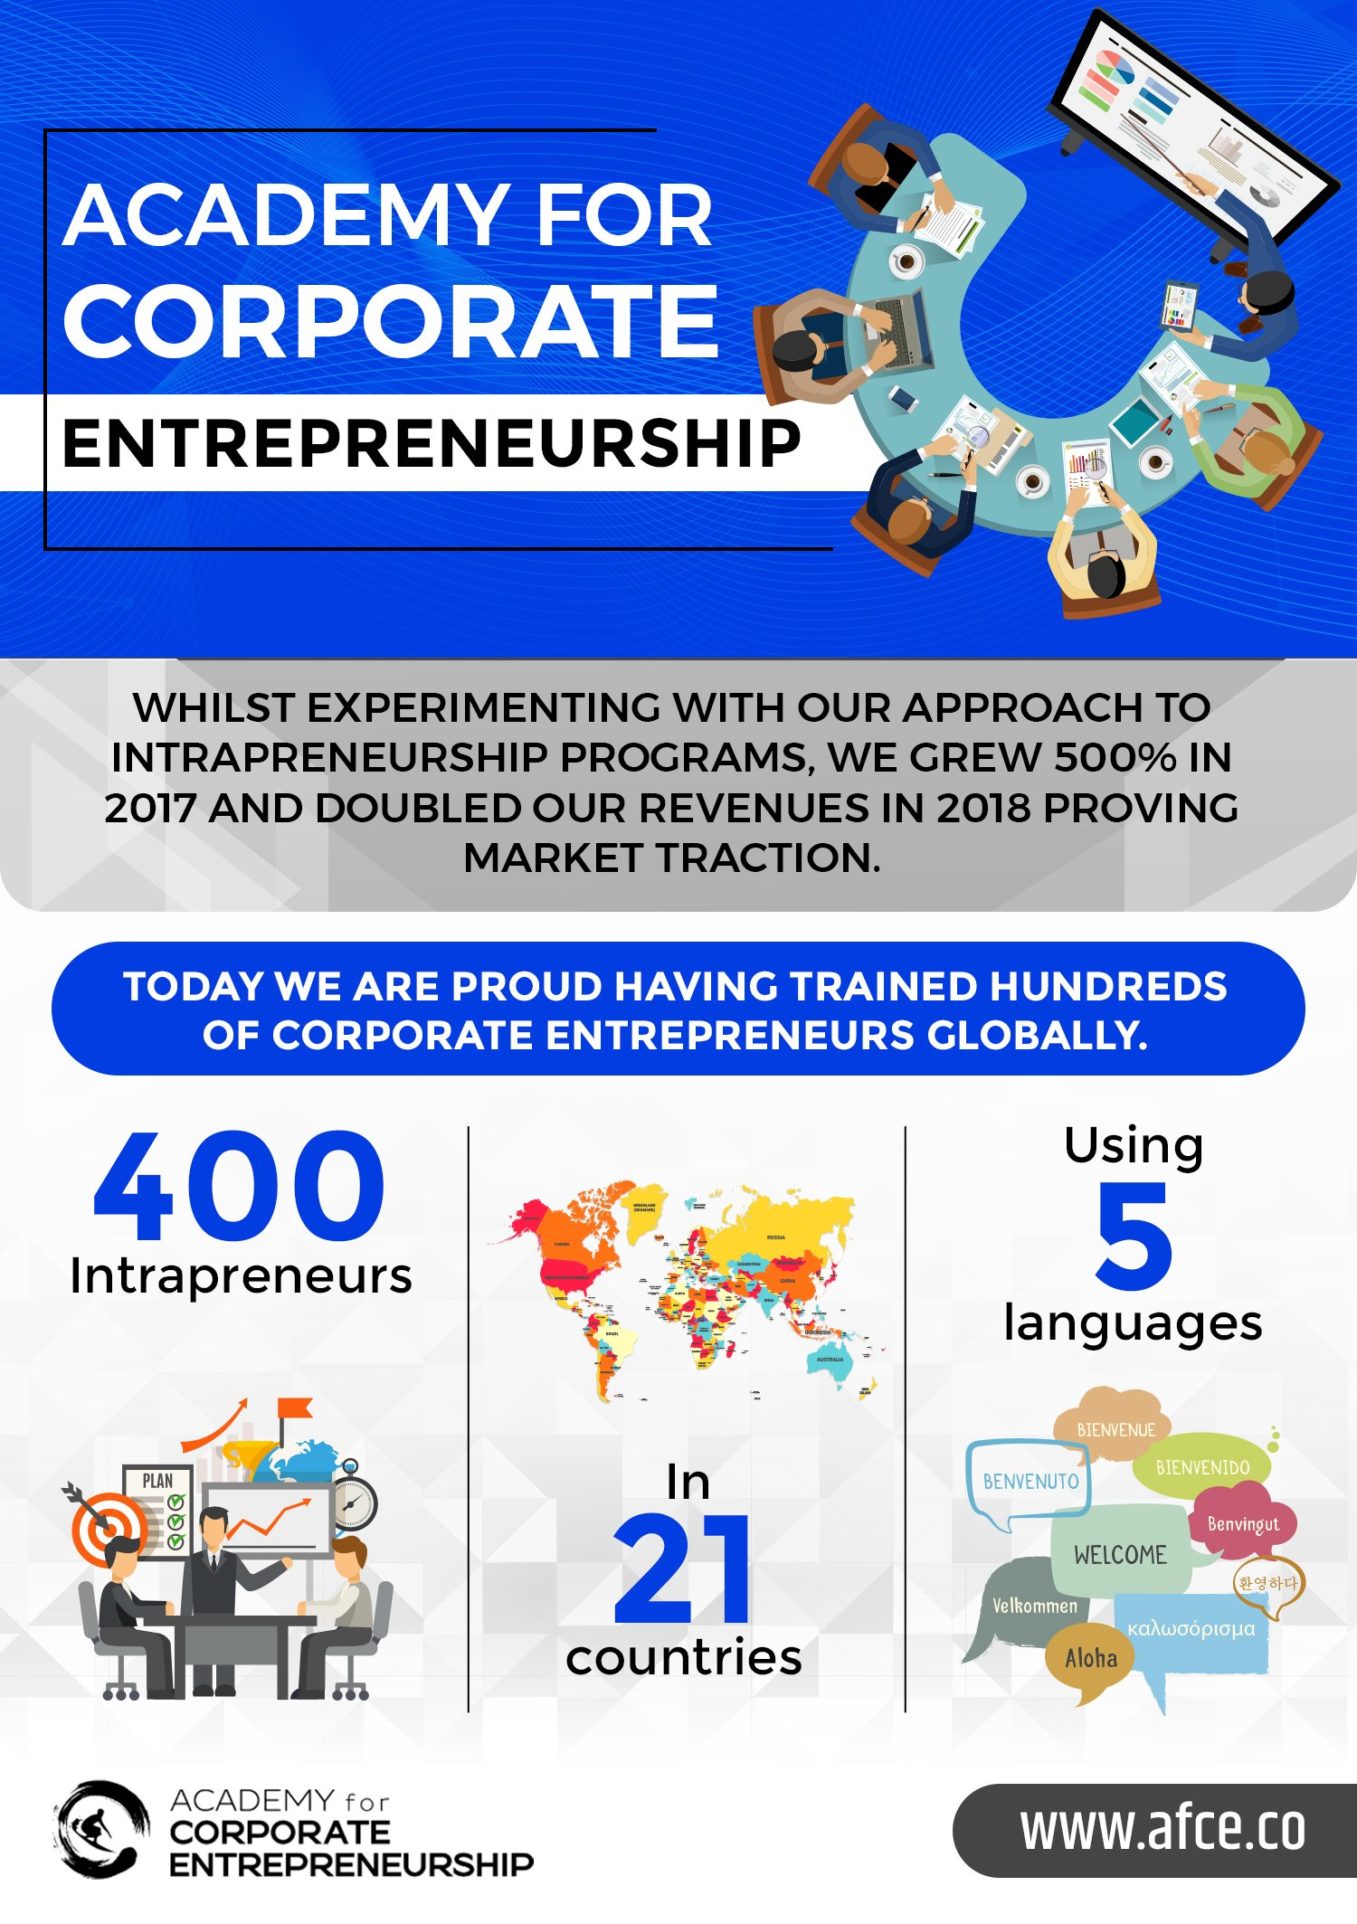 9 Lessons Learnt from Developing 400 Intrapreneurs